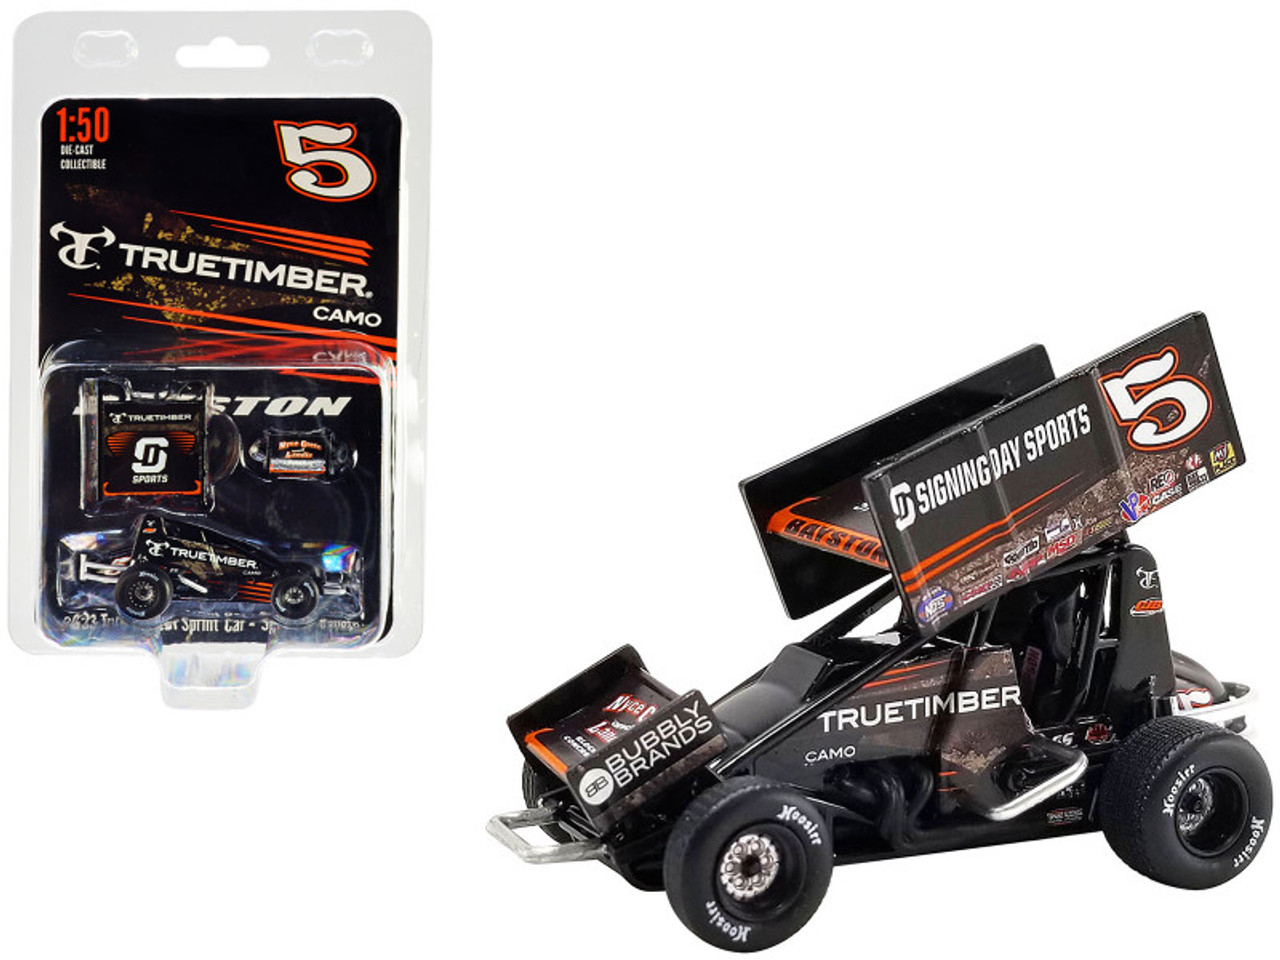 Winged Sprint Car #5 Spencer Bayston "TrueTimber Camo" CJB Motorsports "Rookie of the Year" "World of Outlaws" (2022) 1/50 Diecast Model Car by ACME